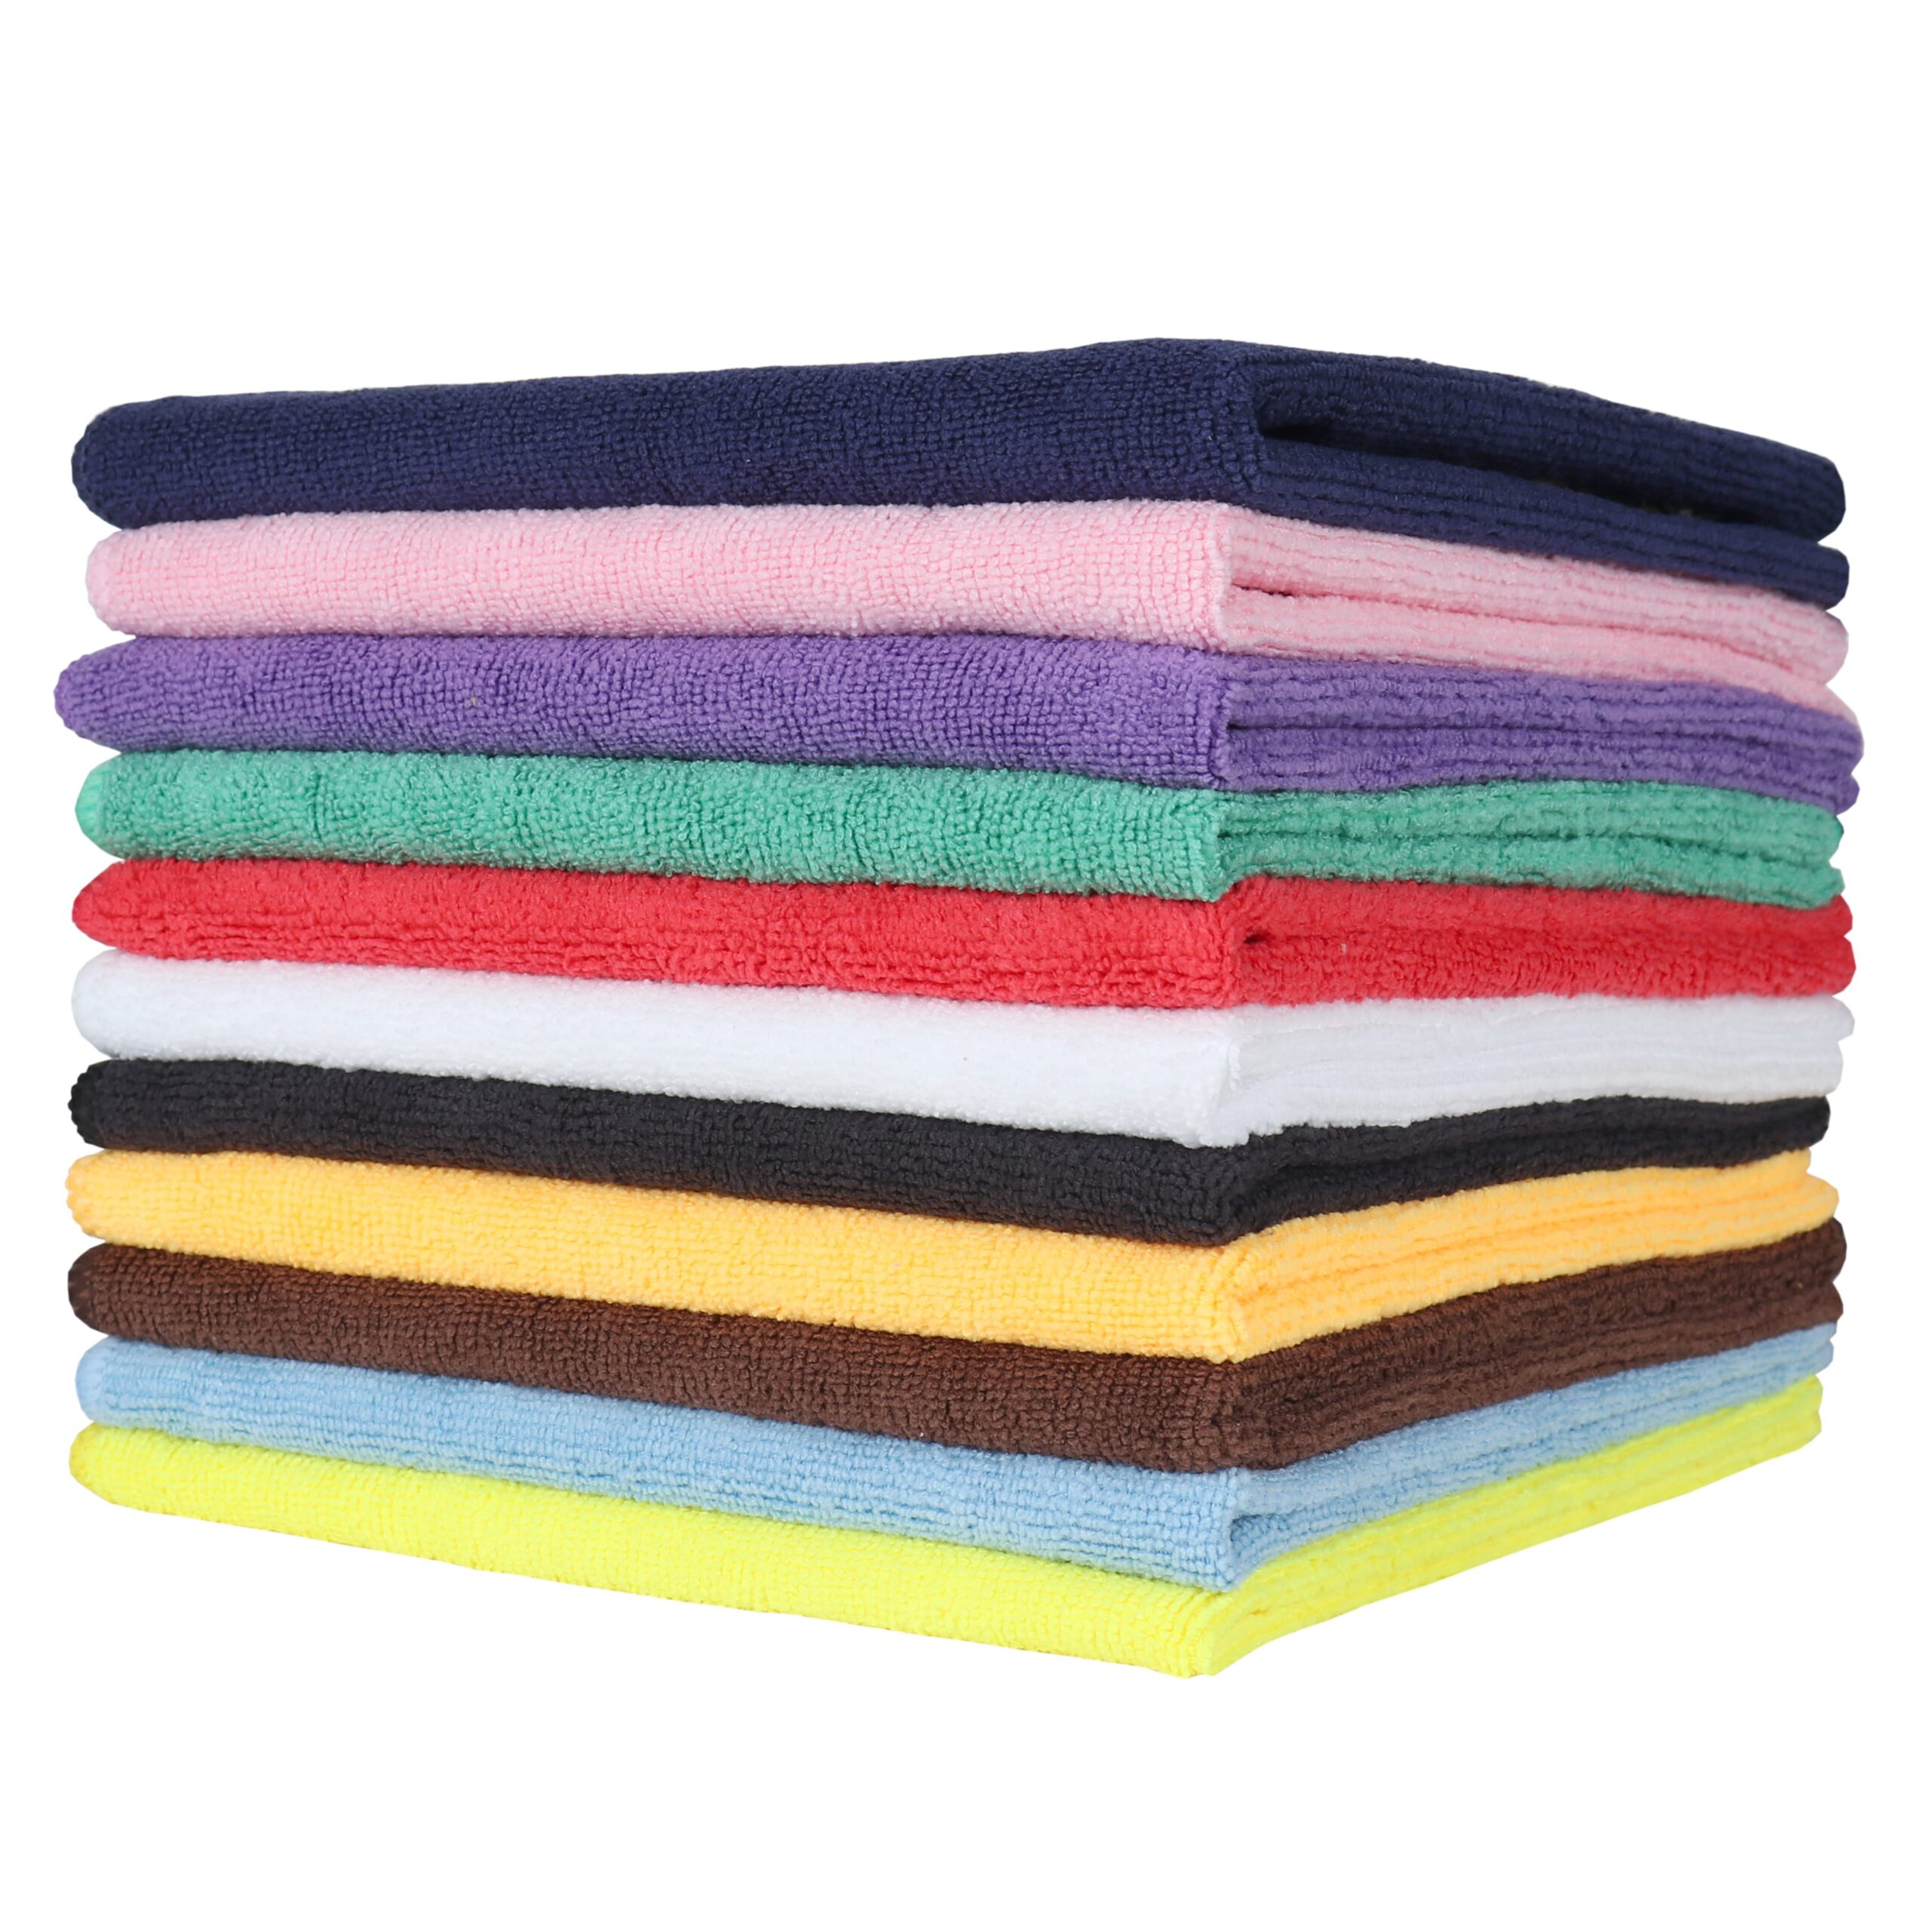 New Irregular Terry Washcloths Cleaning Rags 12x12